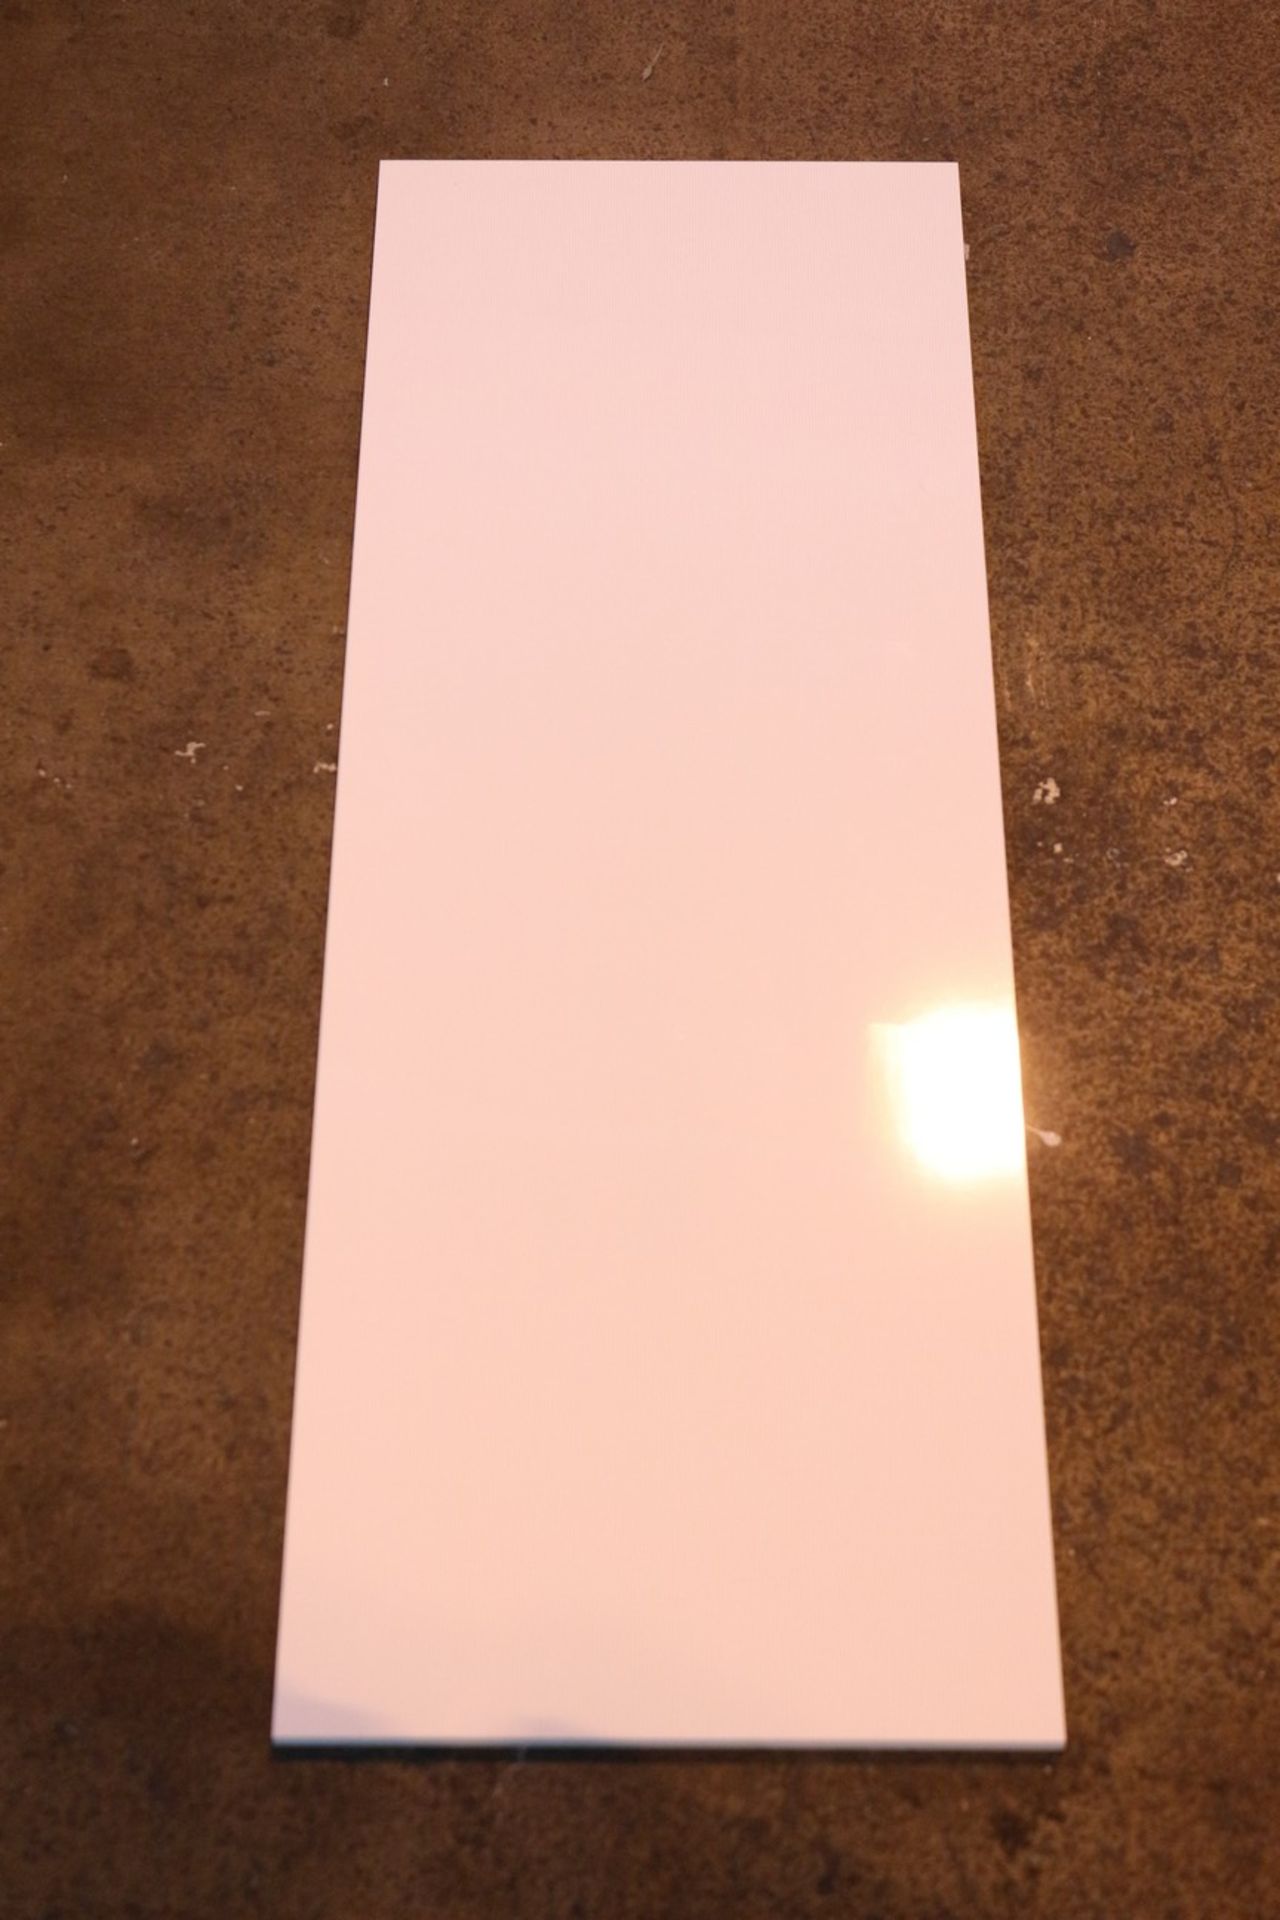 54X BY PORCELANOSA BRAND NEW FACTORY SEALED GLASS BLANCO 310X900 WHITE FLOOR TILES RRP £3068 (MD-